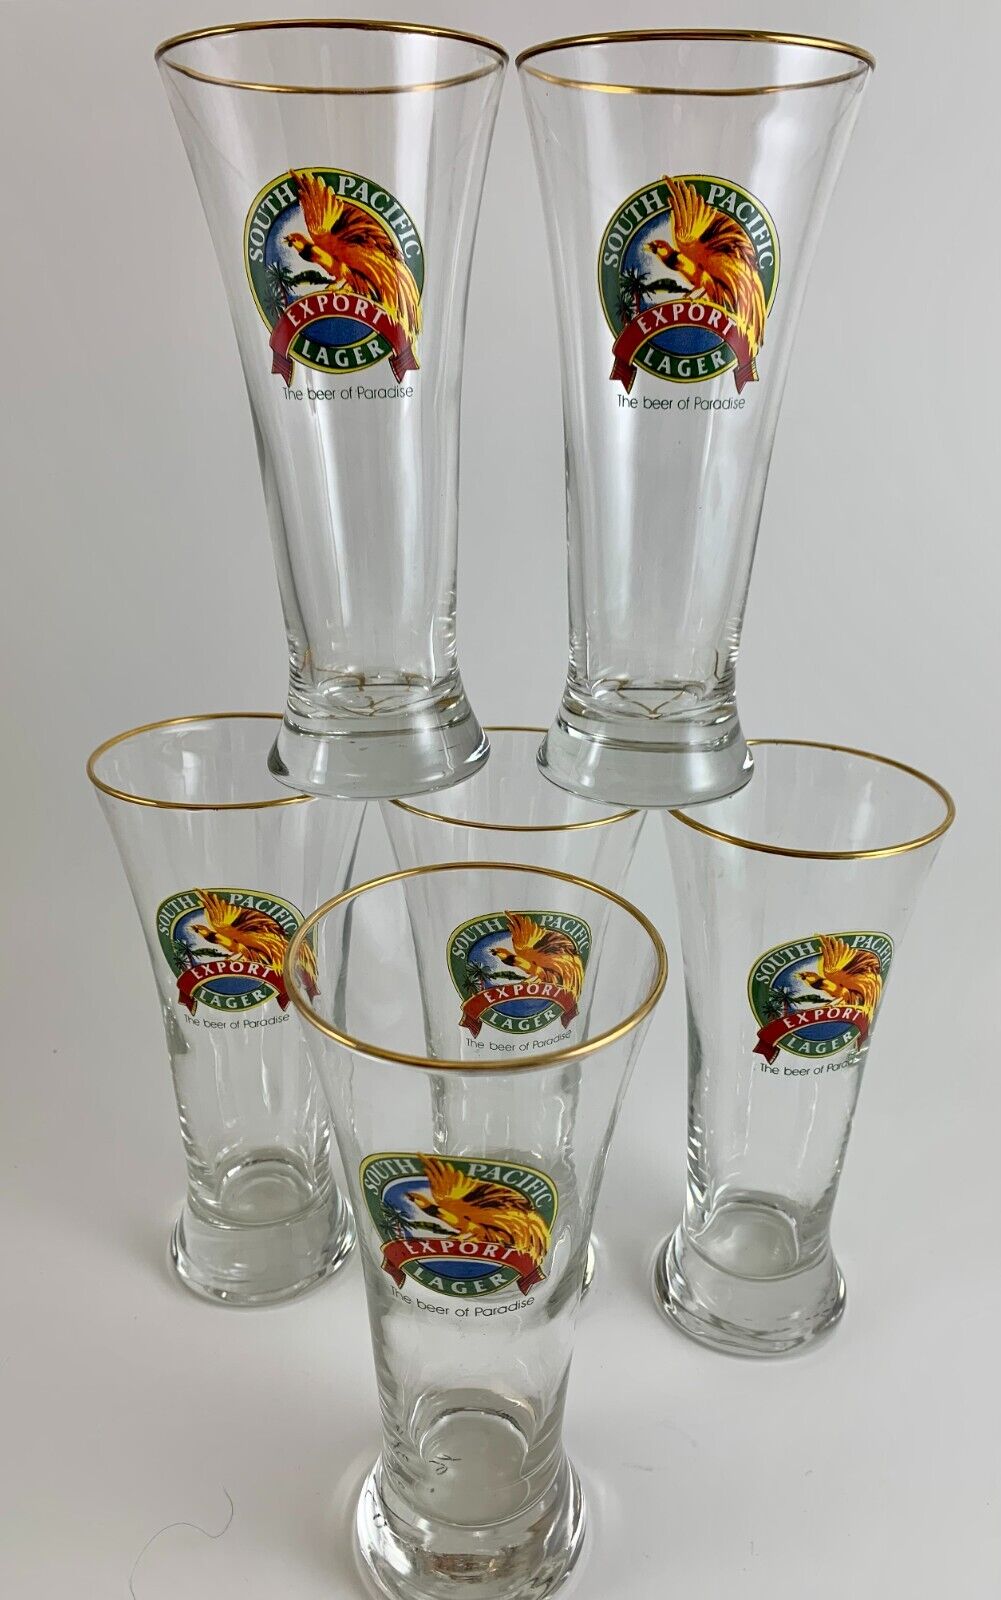 South Pacific Export~ Lager Beer Glass Gold Rim Papua, New Guinea~ Multiples